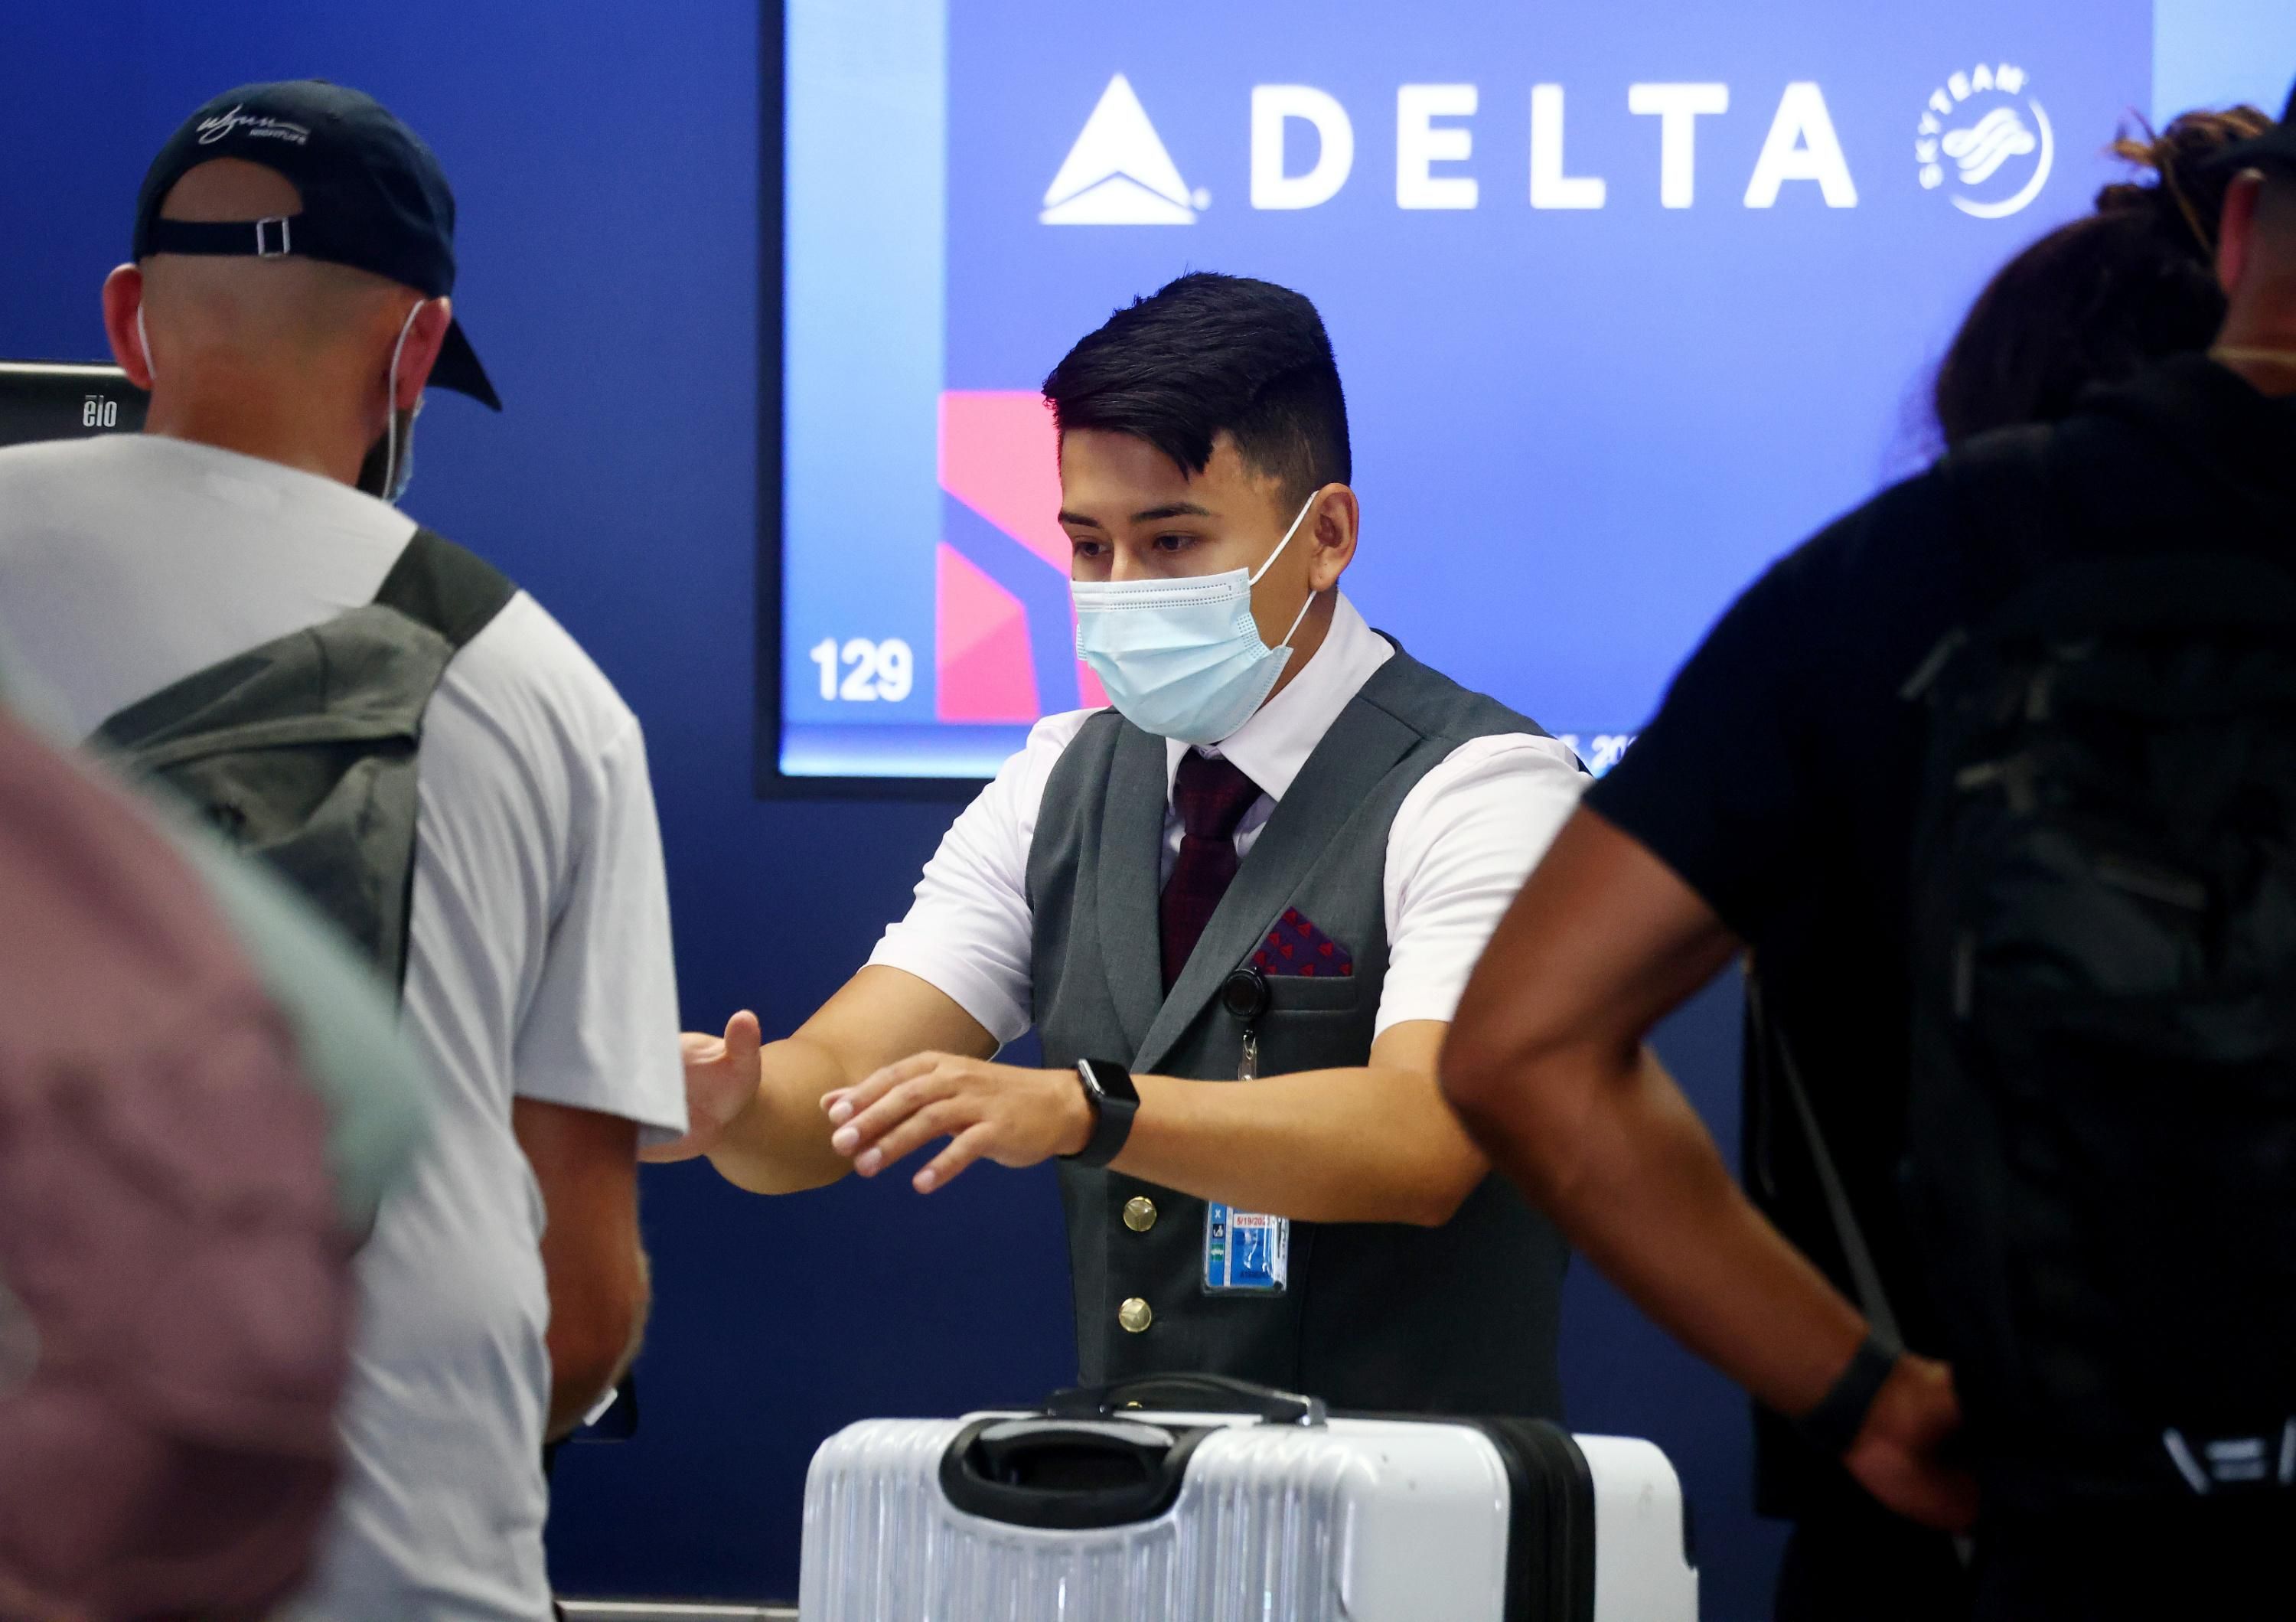 A Delta Air Lines employee